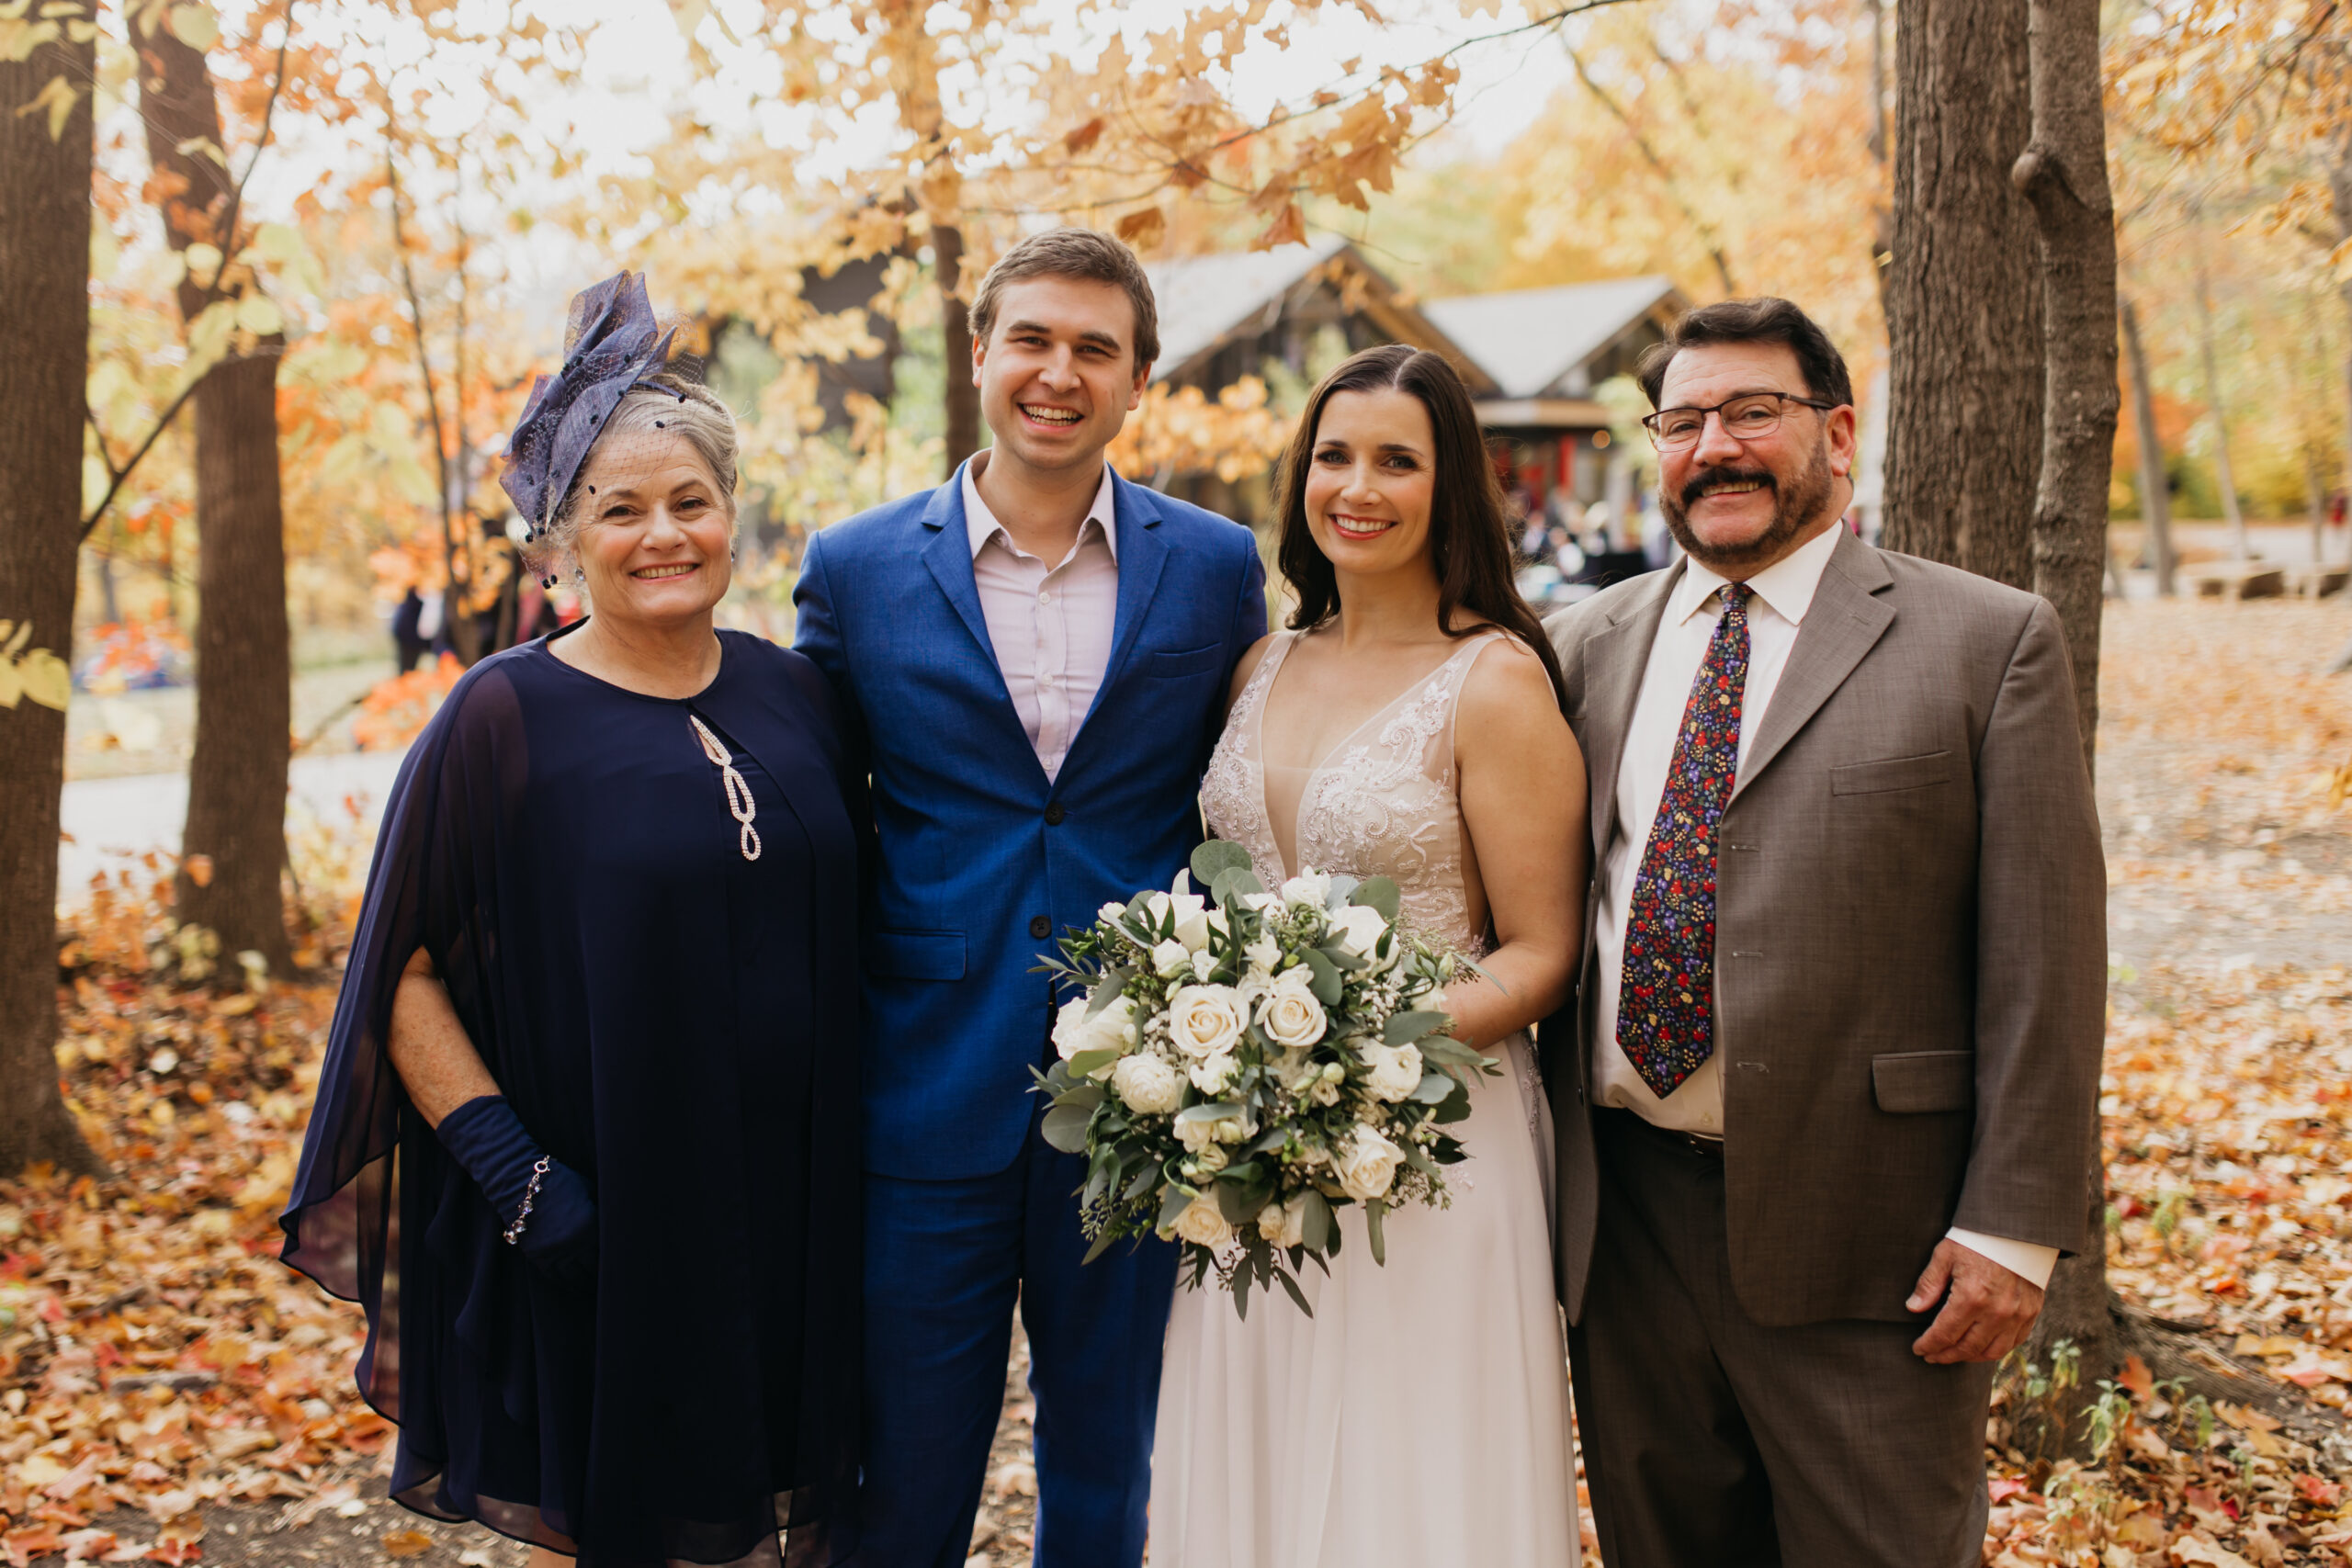 a photo of the bride and groom with their loved ones during their fall wedding